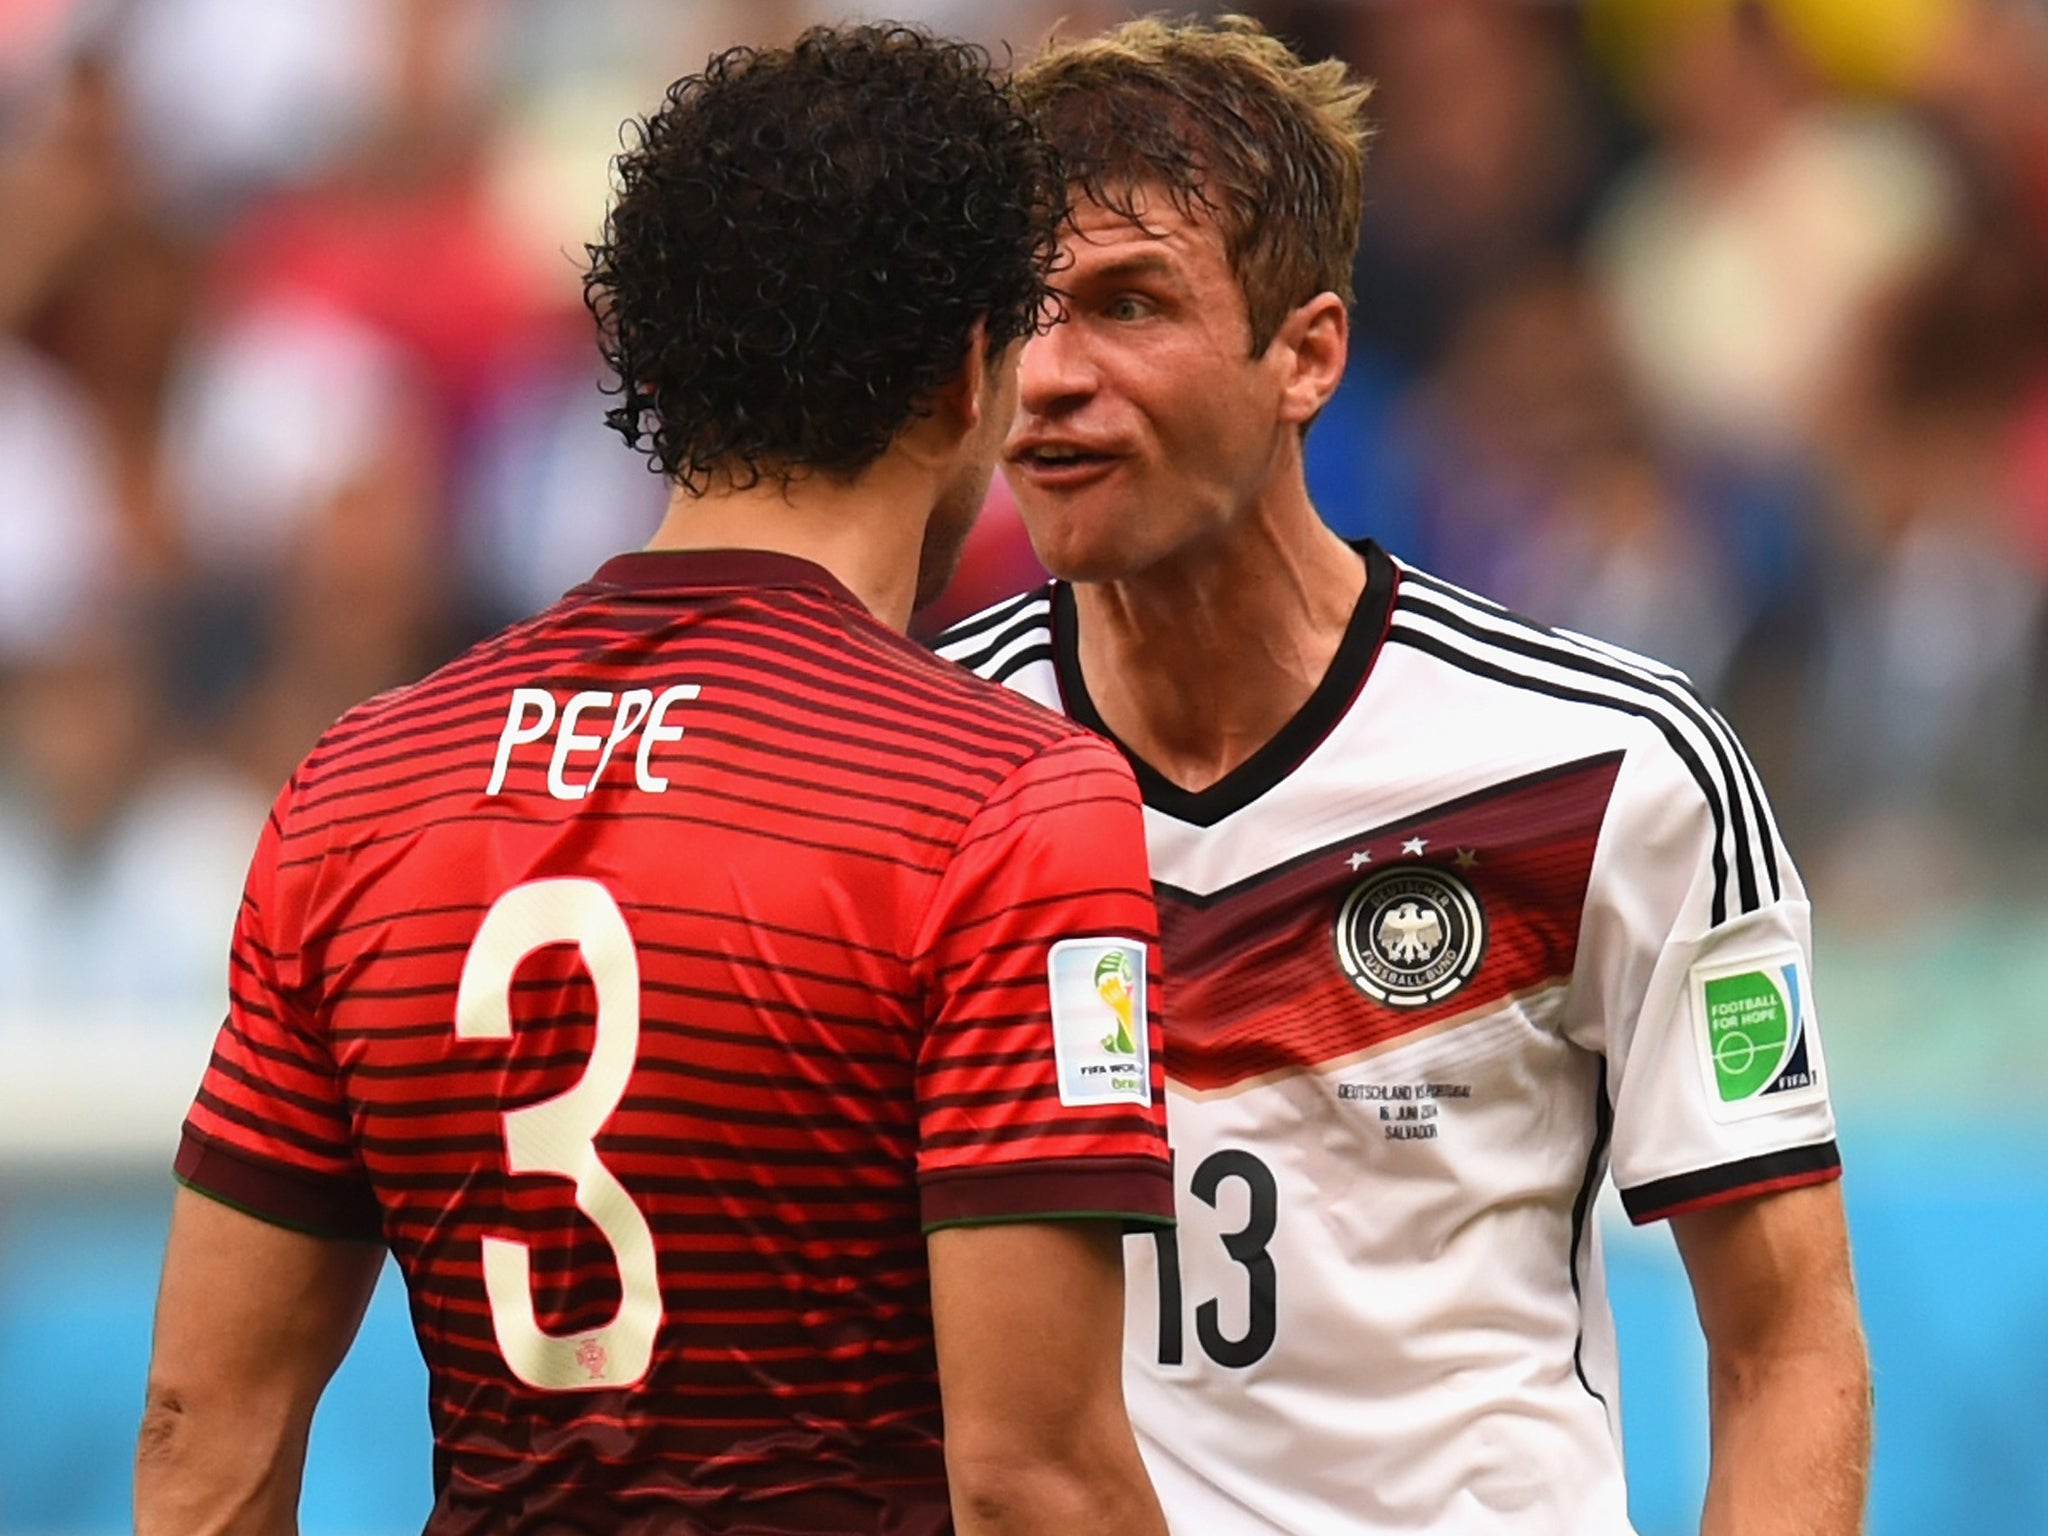 Thomas Mueller comes together with Pepe